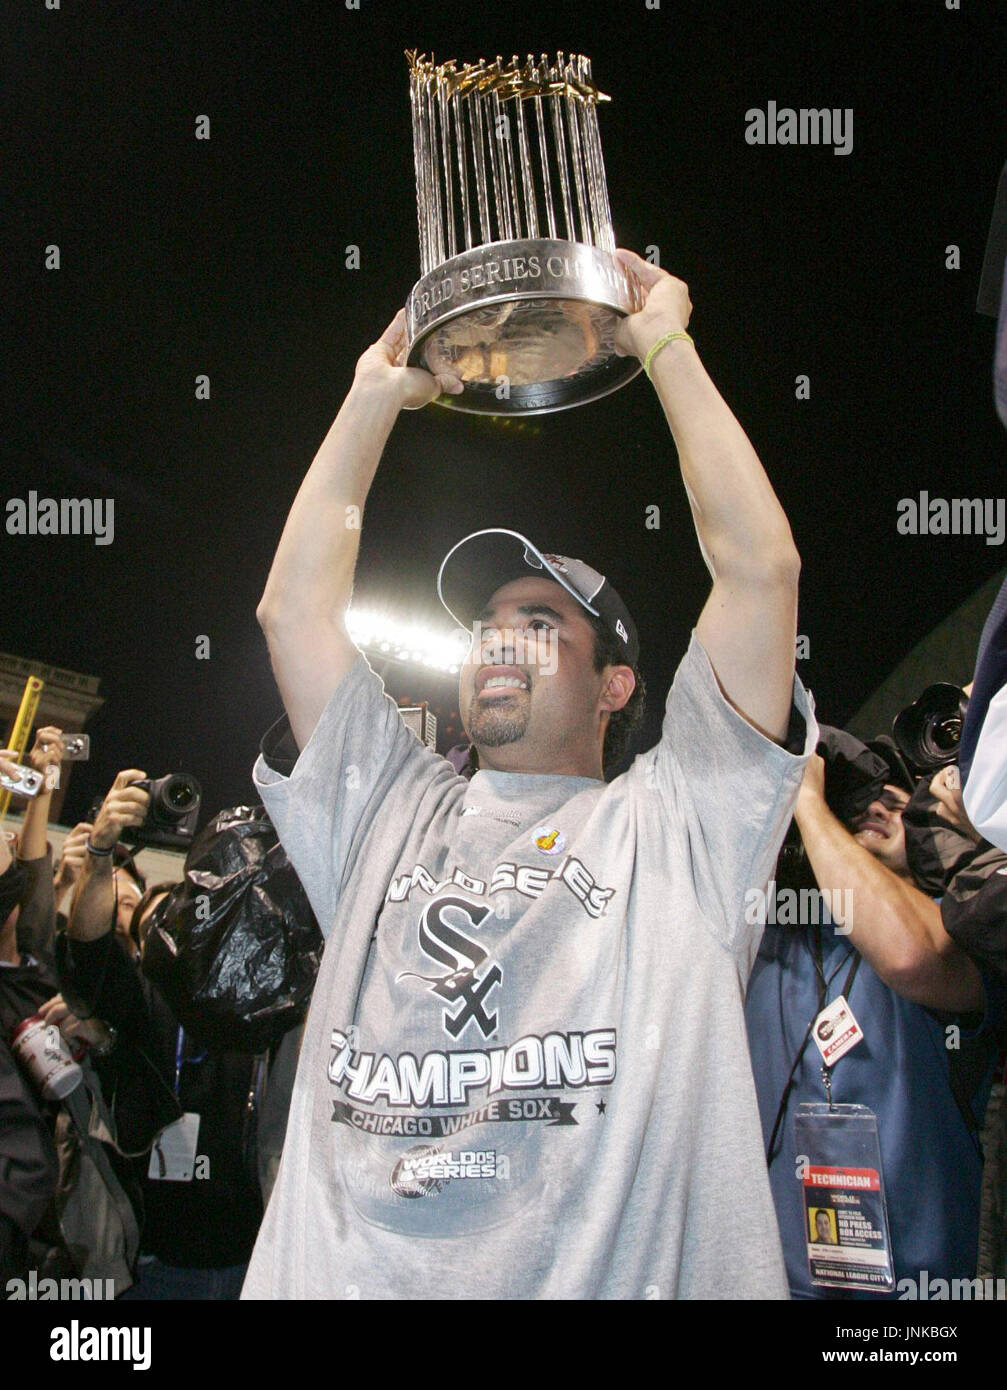 Chicago White Sox manager Ozzie Guillen hoists the World Series trophy  after beating the Houston Astros 1-0 in game 4 of the World Series, October  26, 2005 in Houston, TX. The White